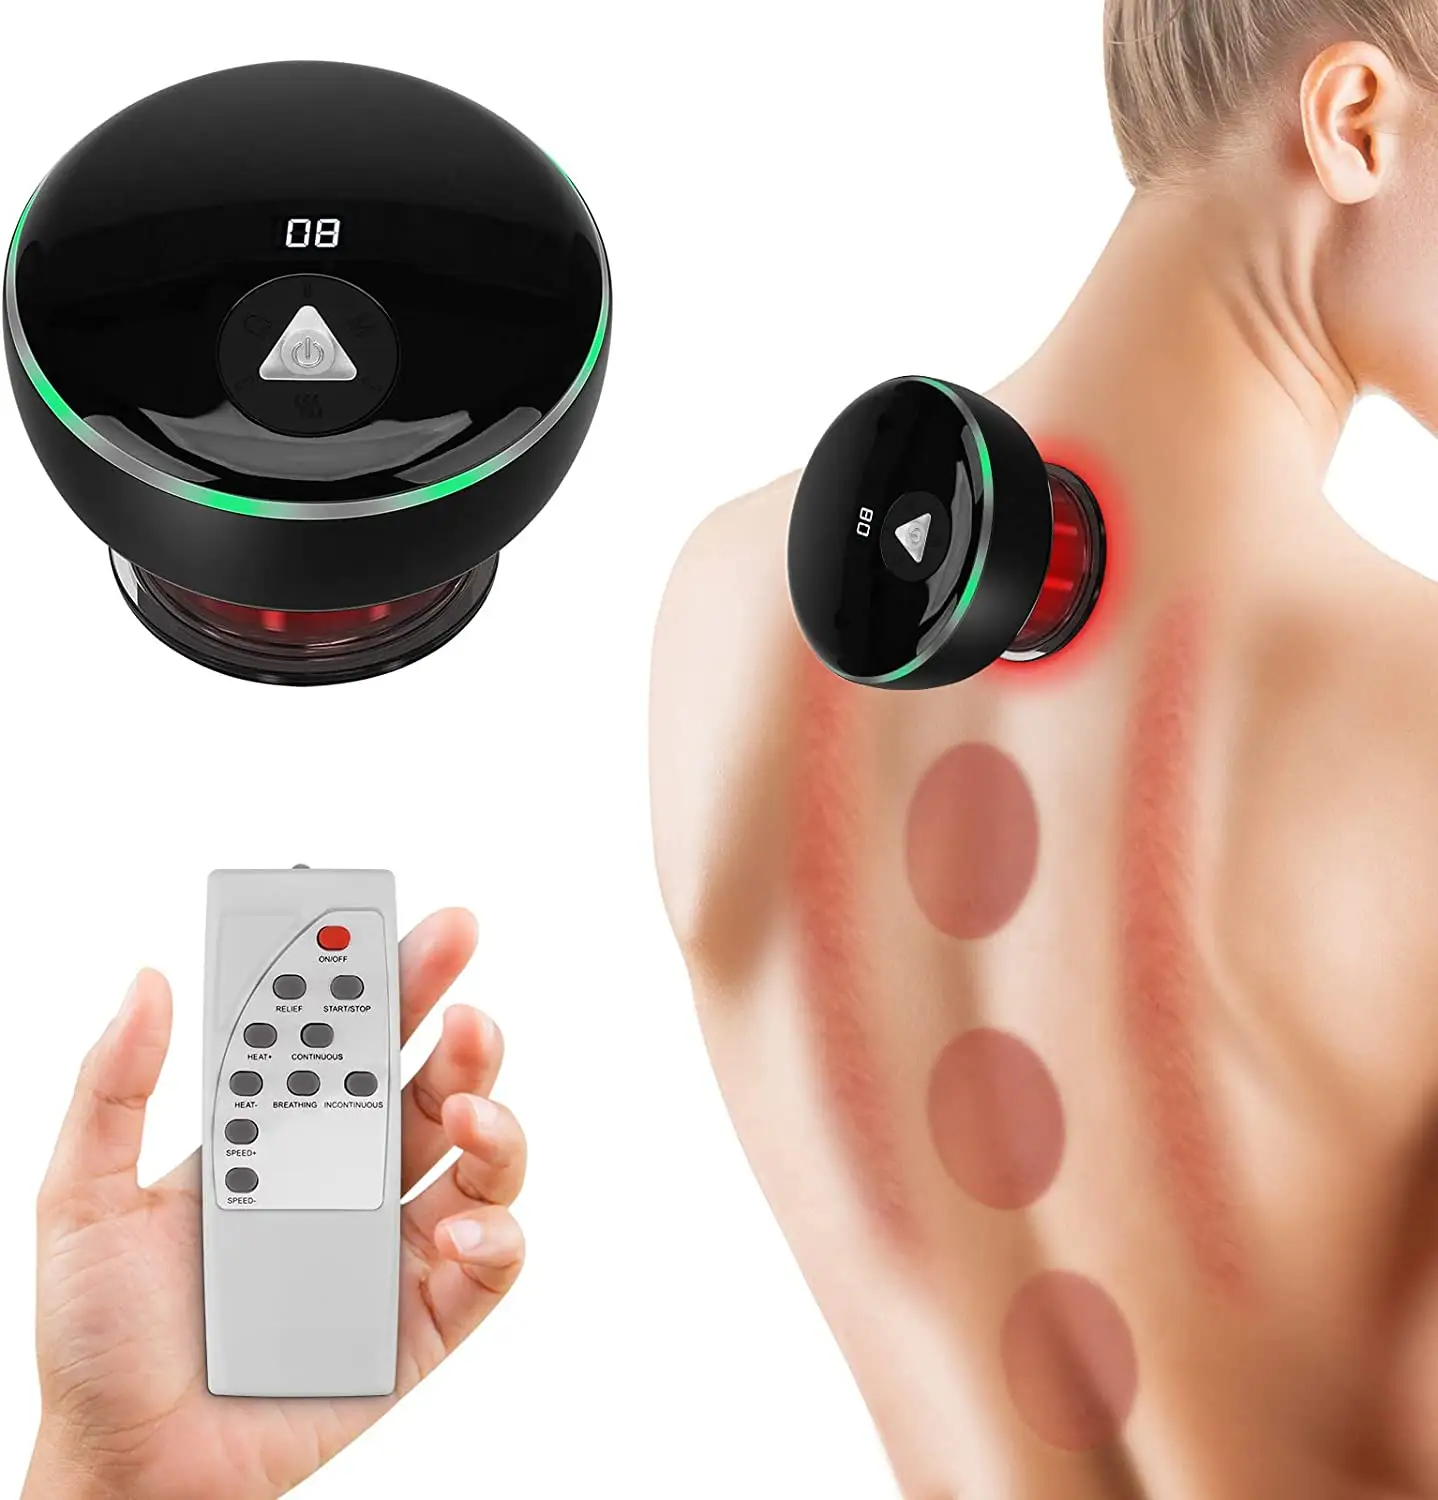 NEW Health Physical Remote Control Vacuum Cupping Massage Device Electric Scraping Suction Cup Smart Cupping Therapy Massager